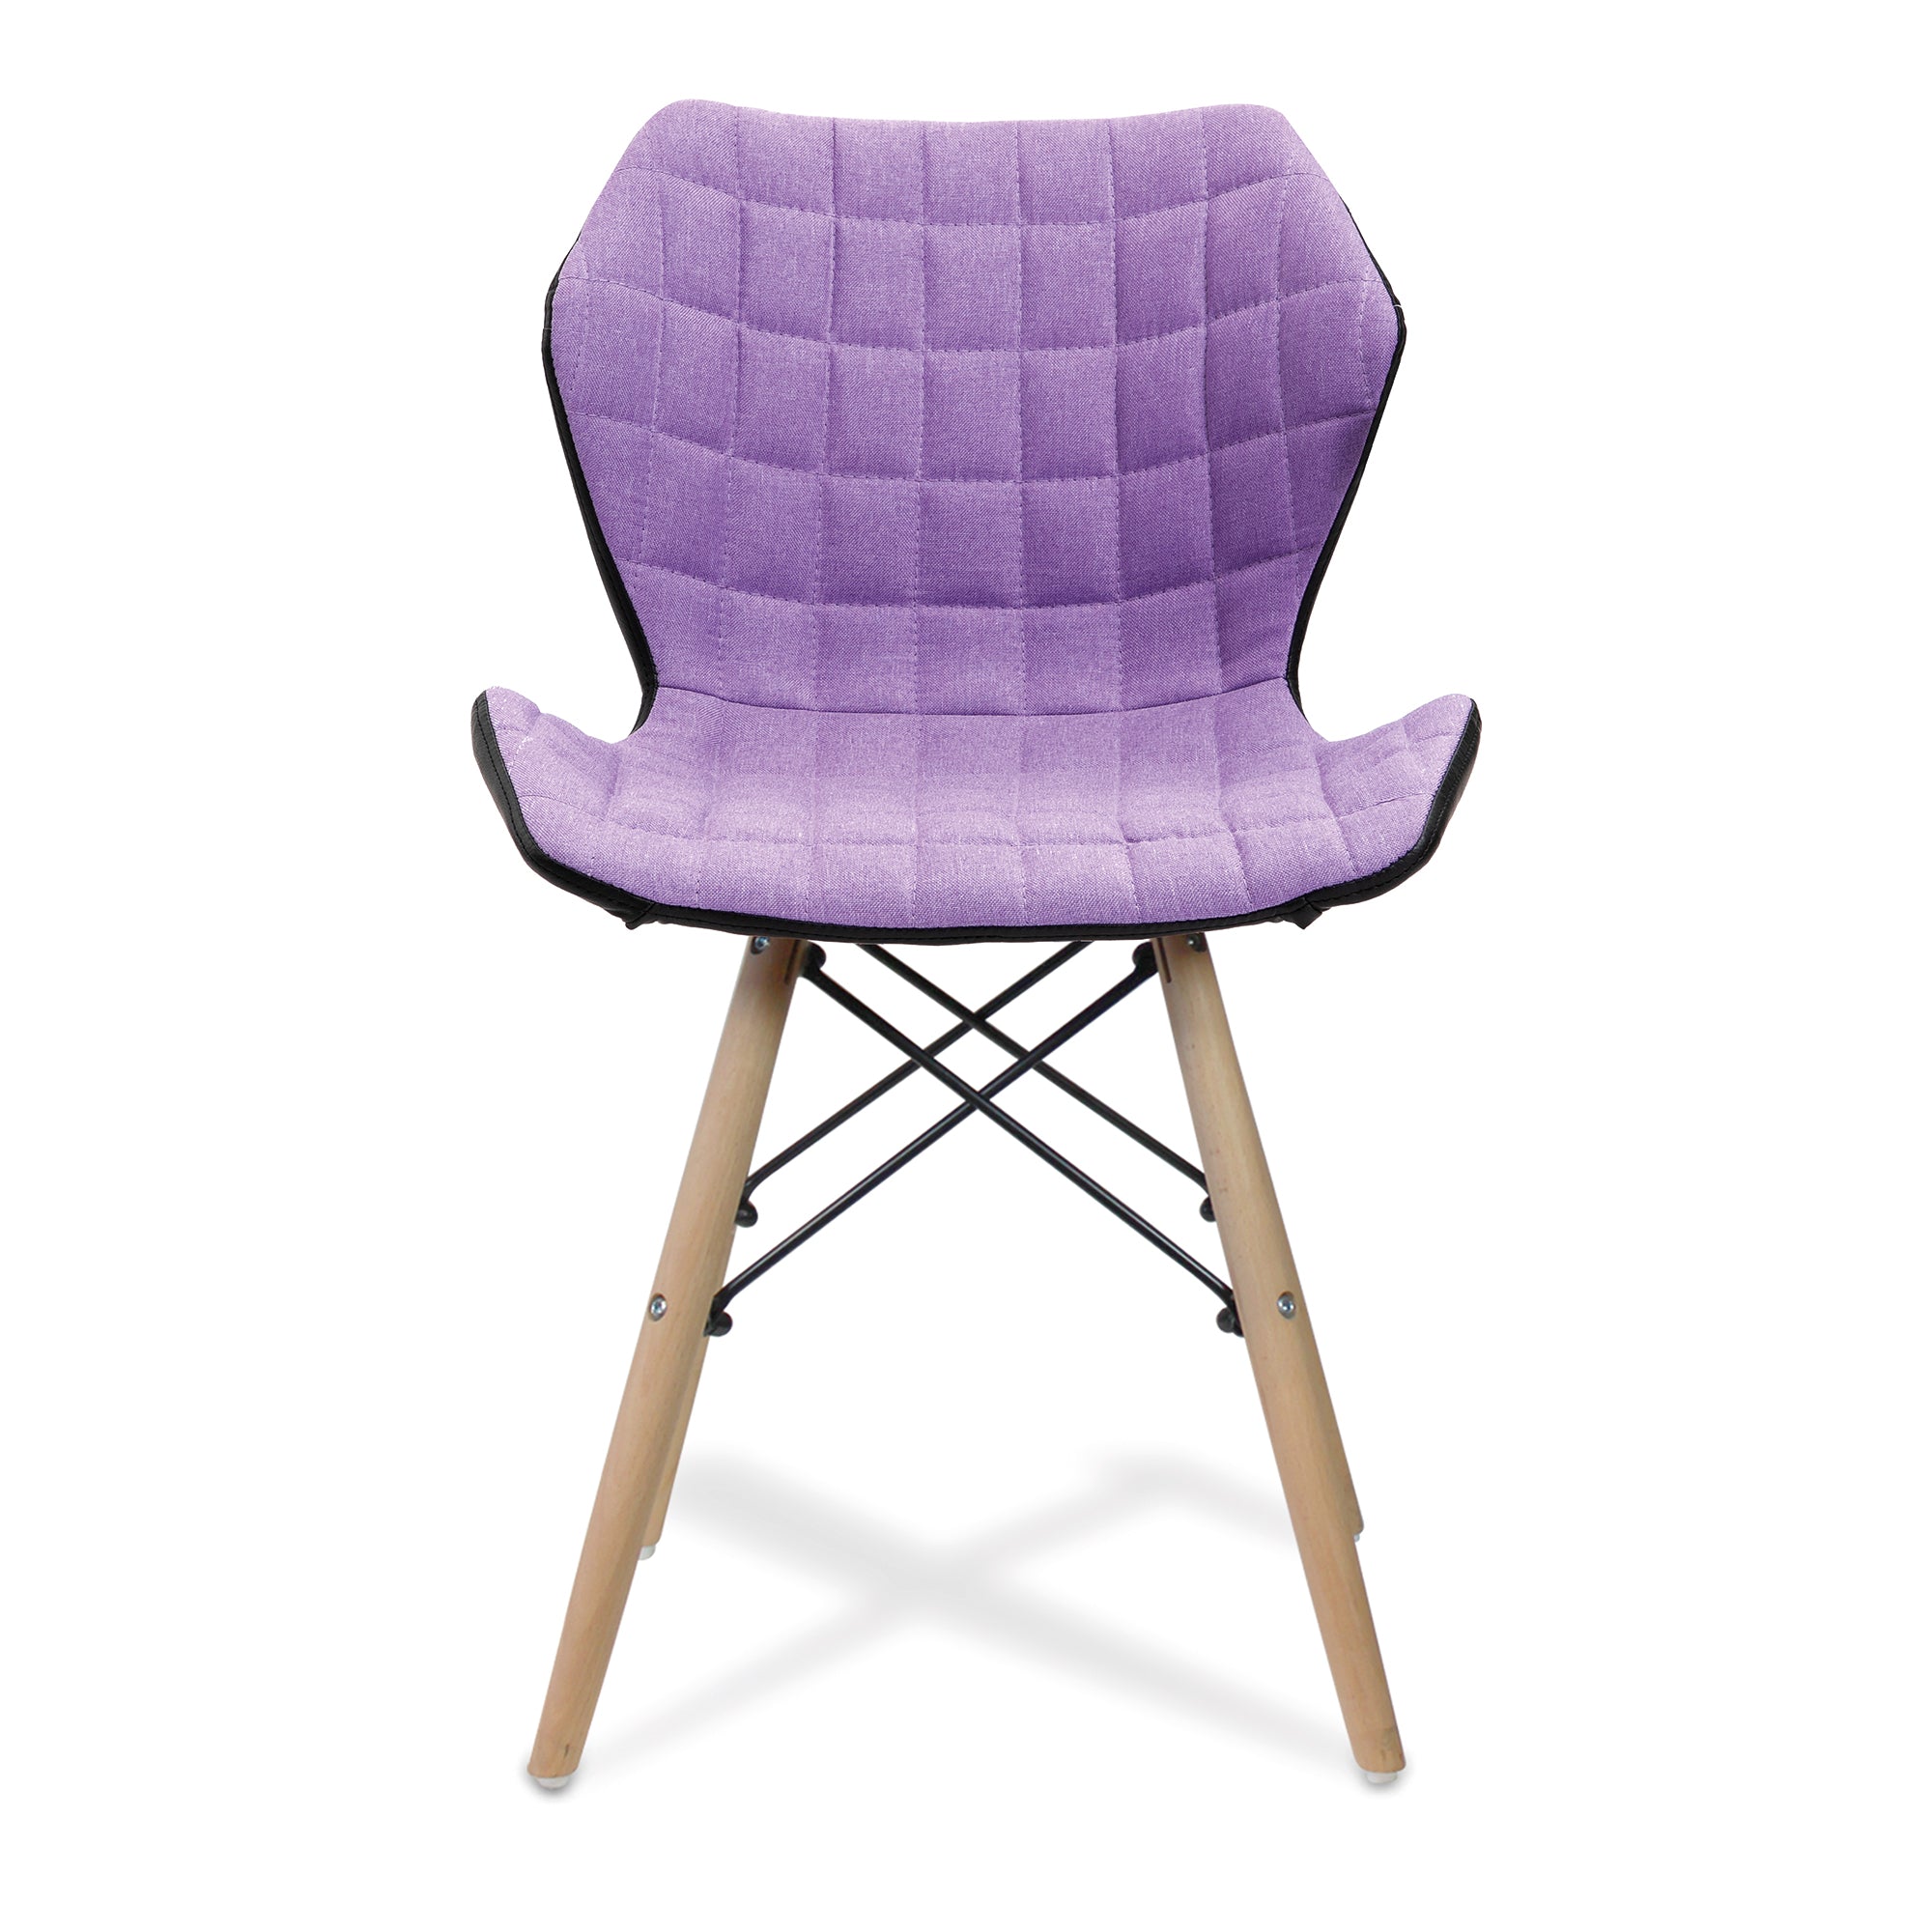 Amelia – Stylish Lightweight Fabric Chair with Solid Beech Legs and Contemporary Panel Stitching